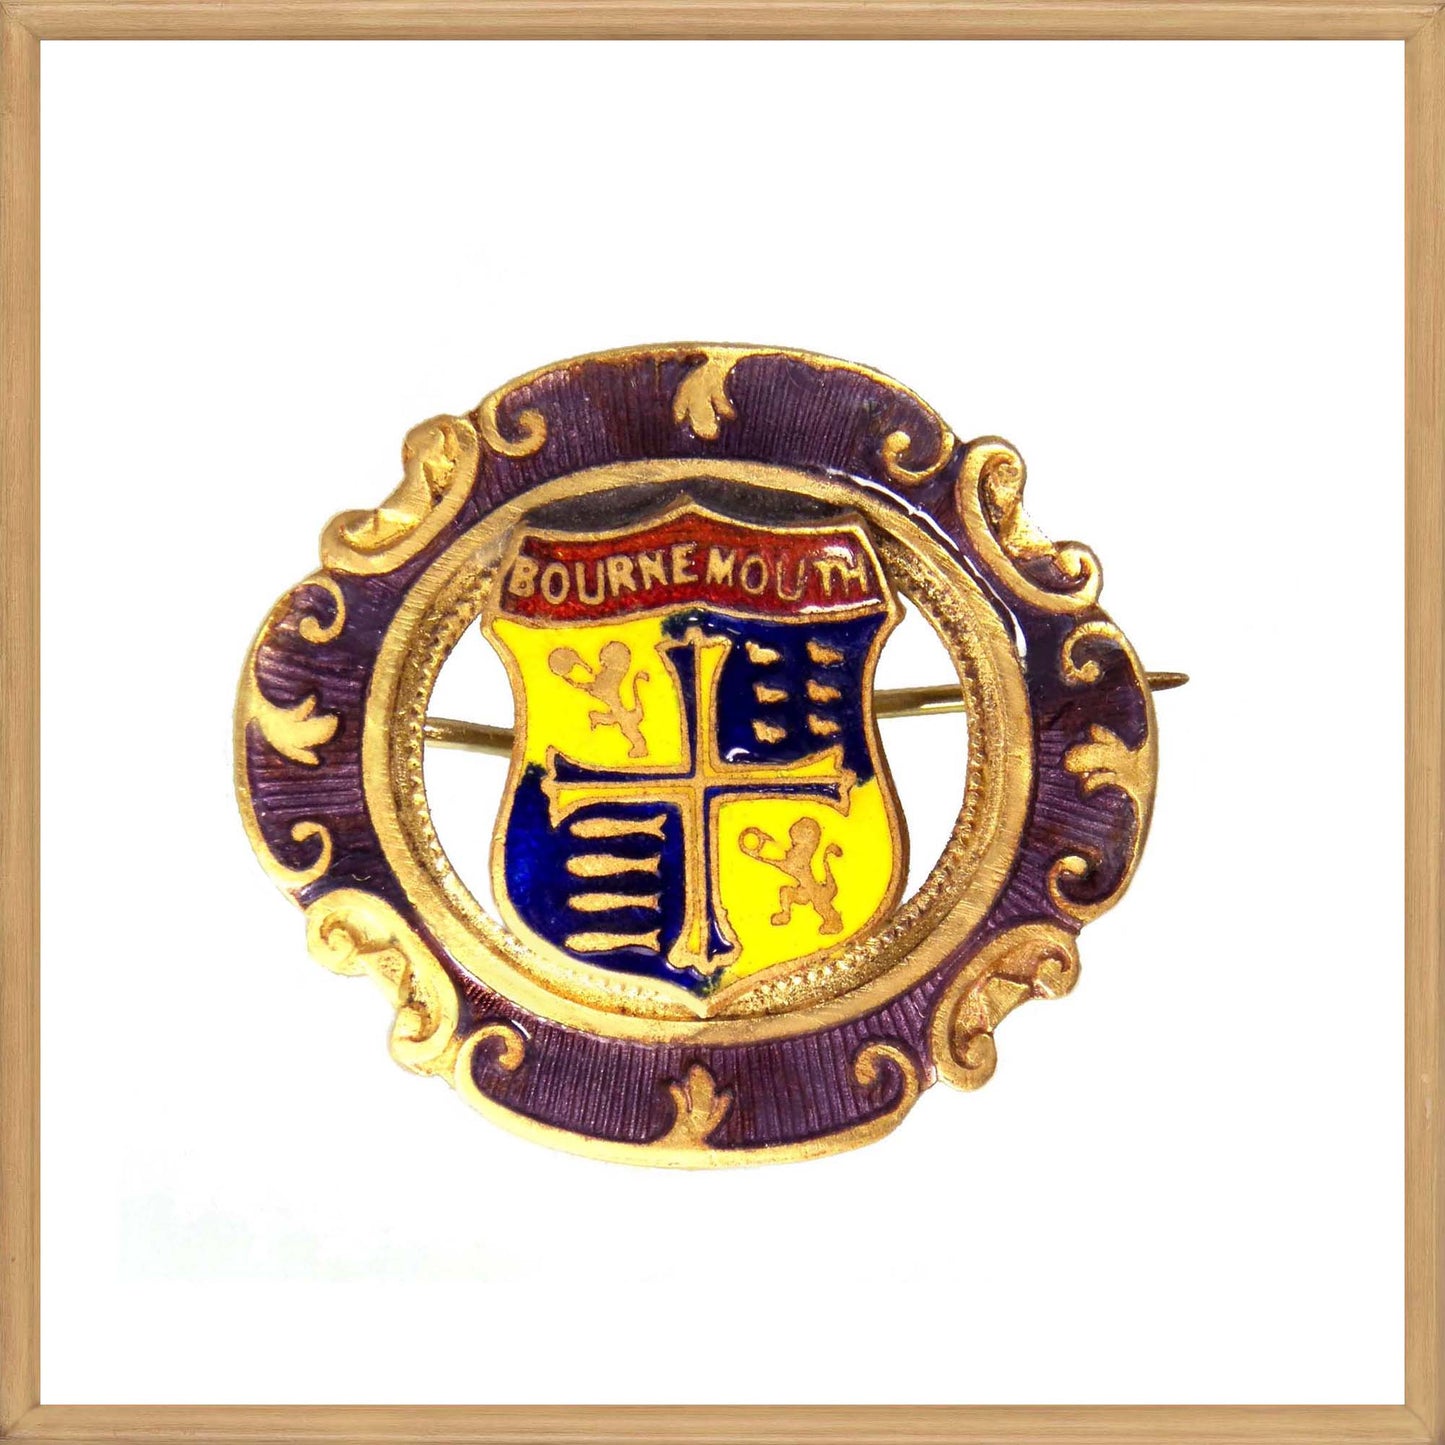 Antique Guilloche Enamel Brooch, Bournemouth Coat of Arm Pin